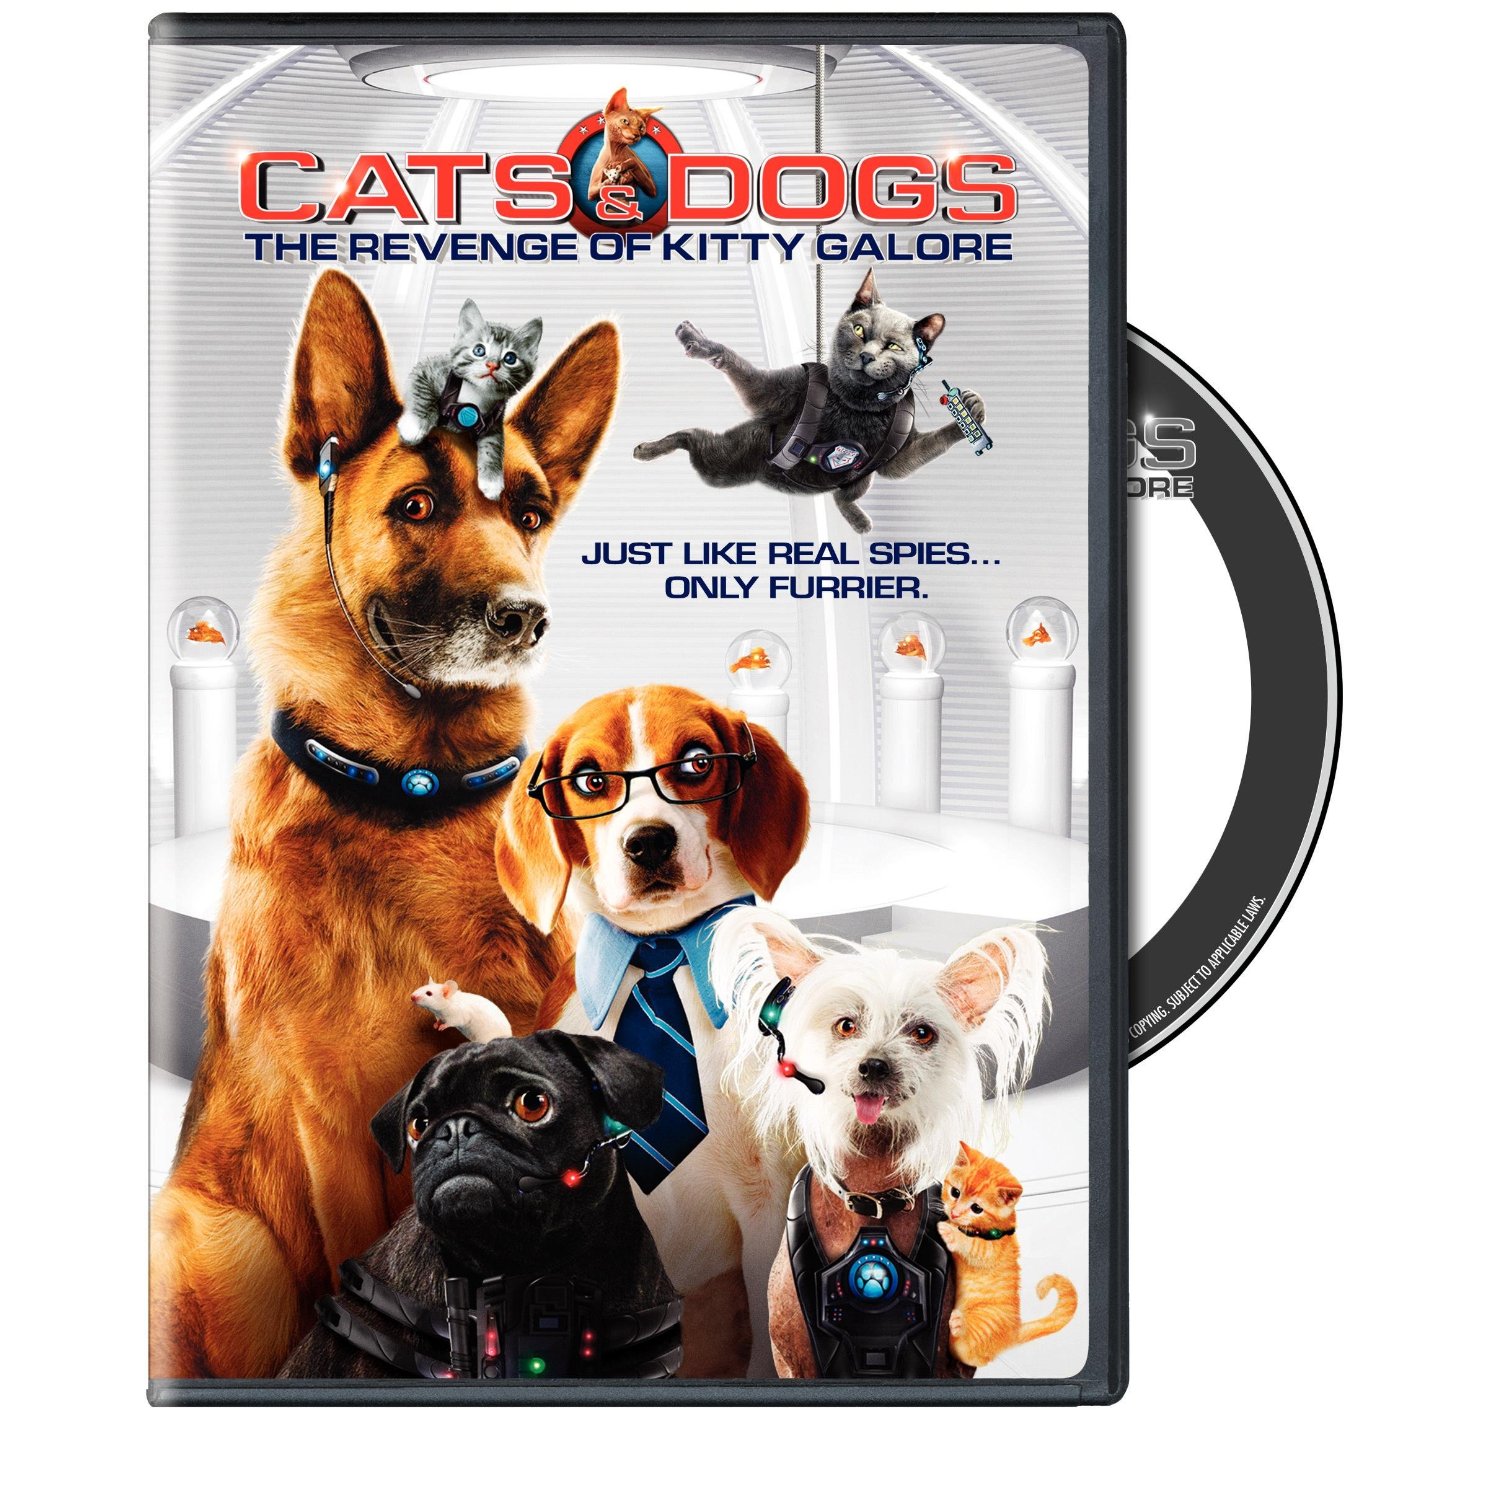 Cats And Dogs: The Revenge Of Kitty Galore